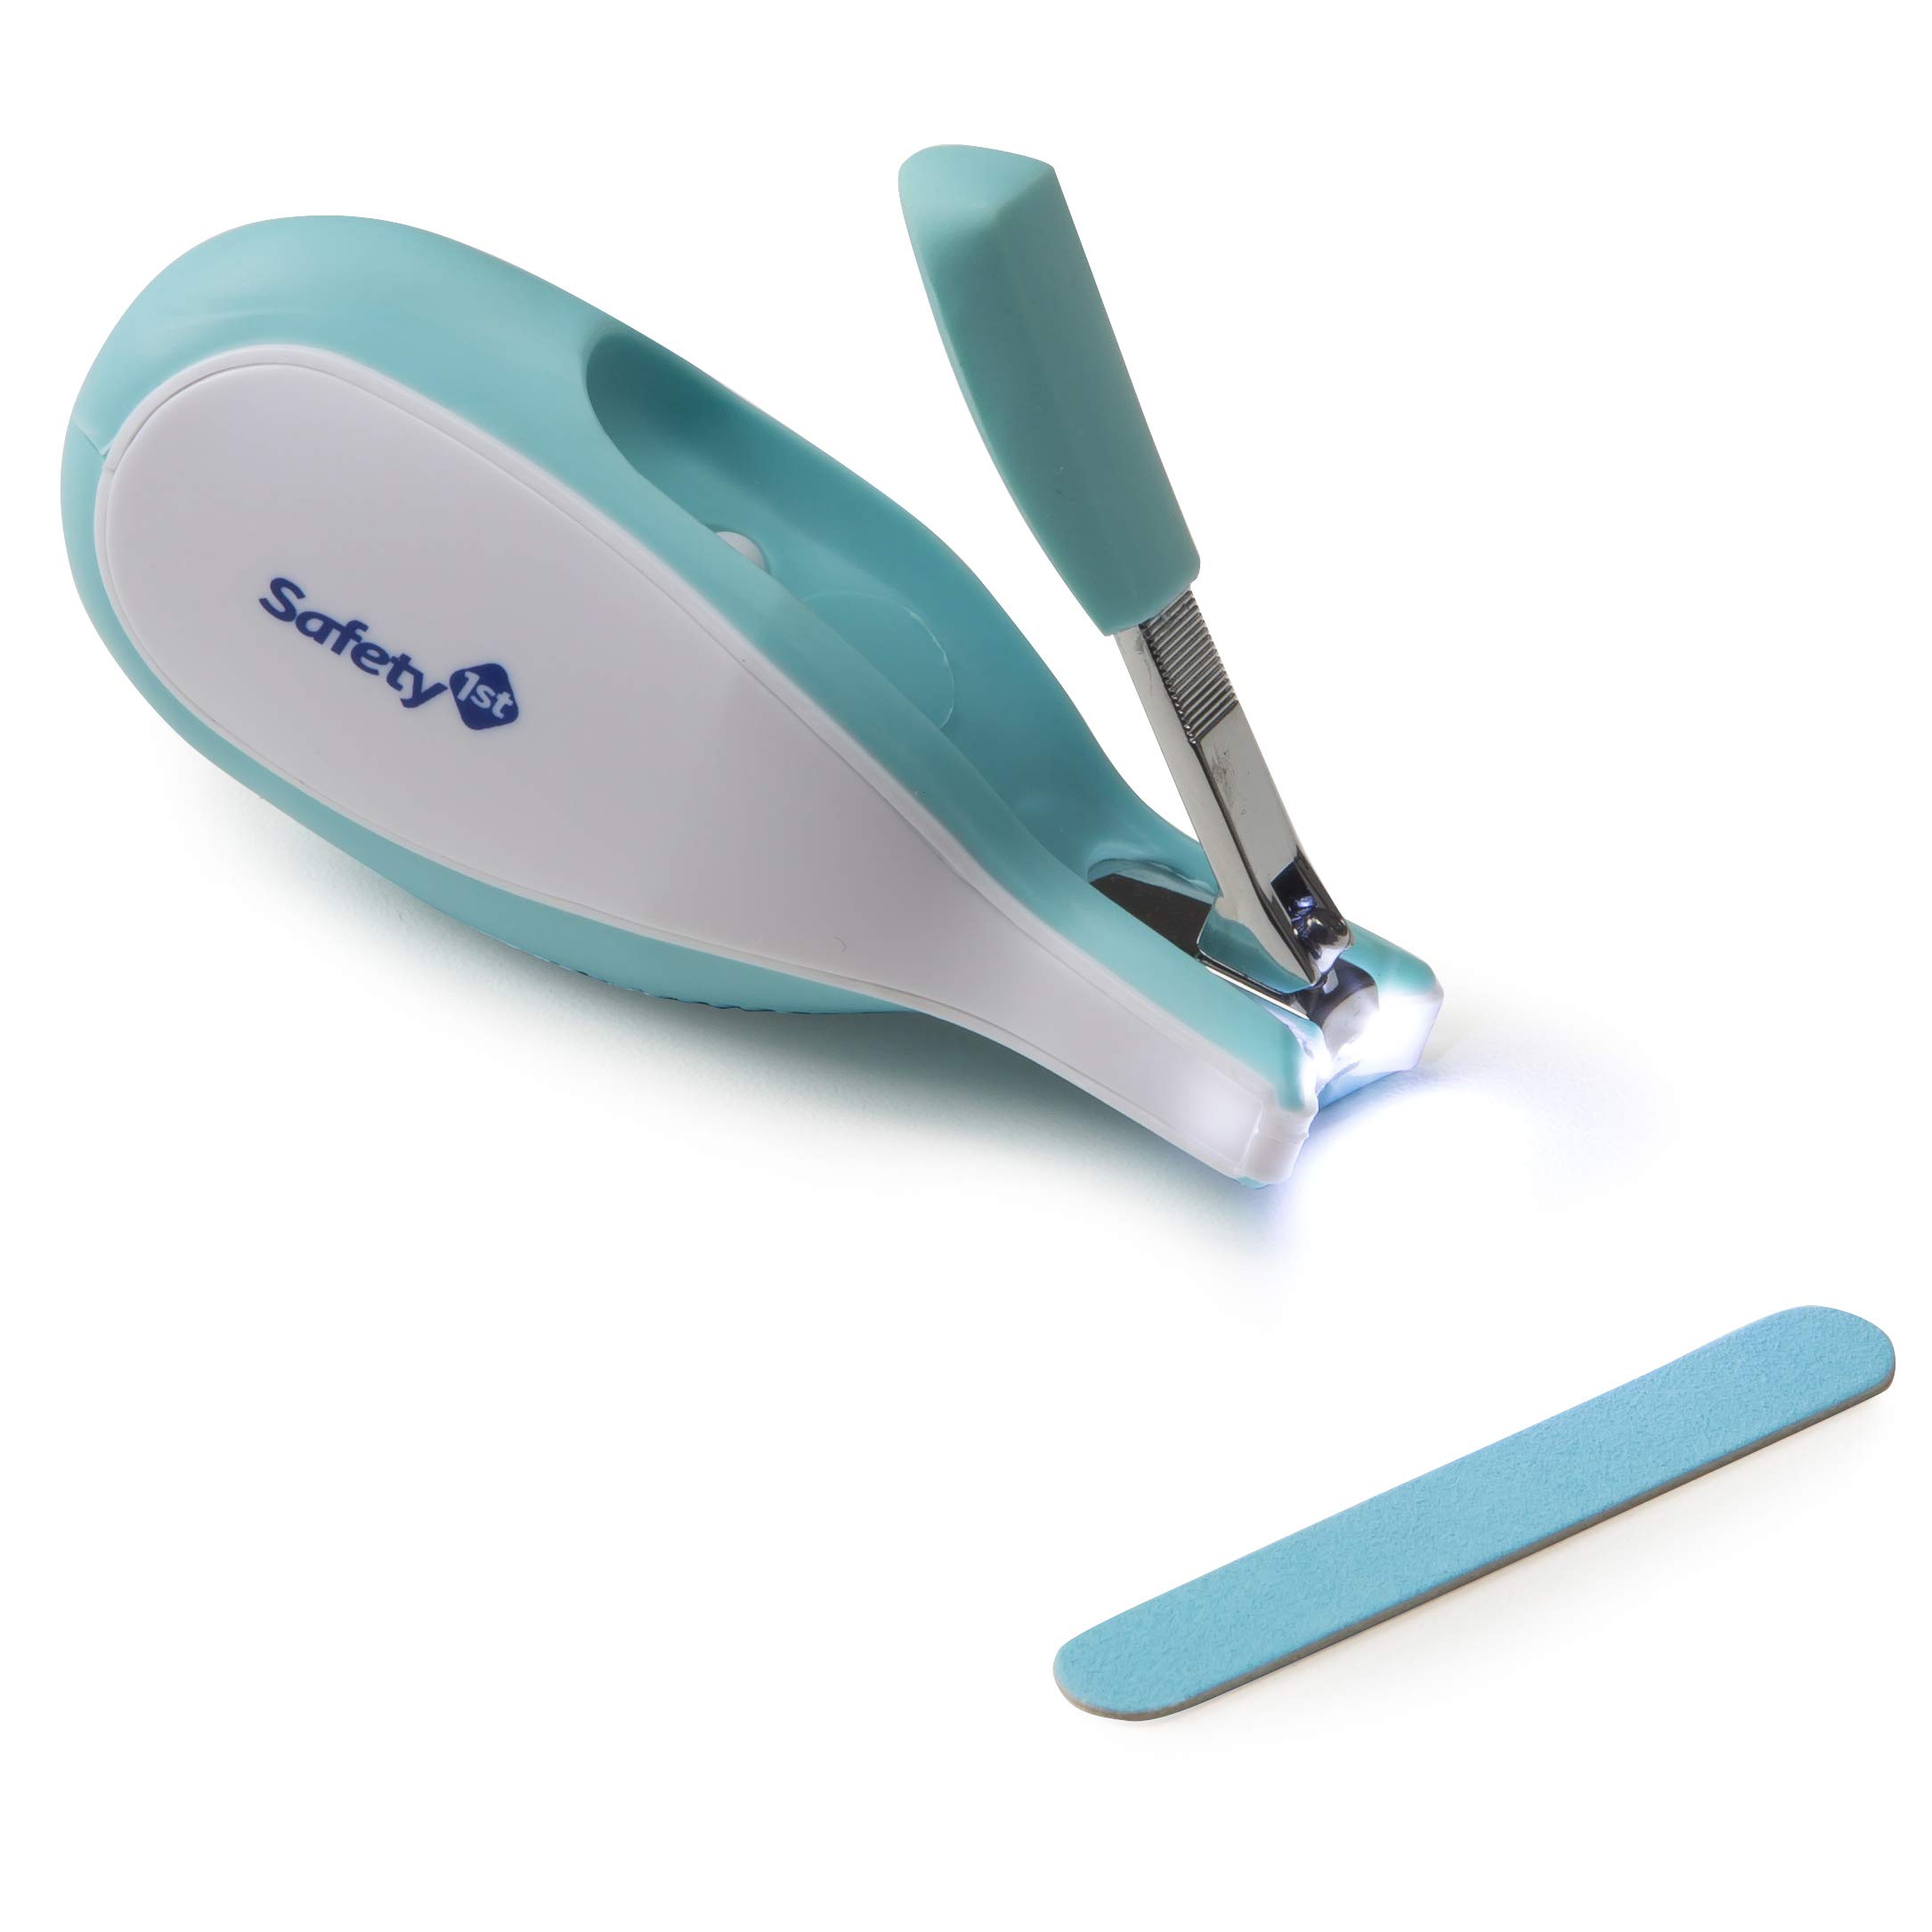 Baby Nail Cutter: Buy Cute Baby Nail Clippers Online | Mothercare India